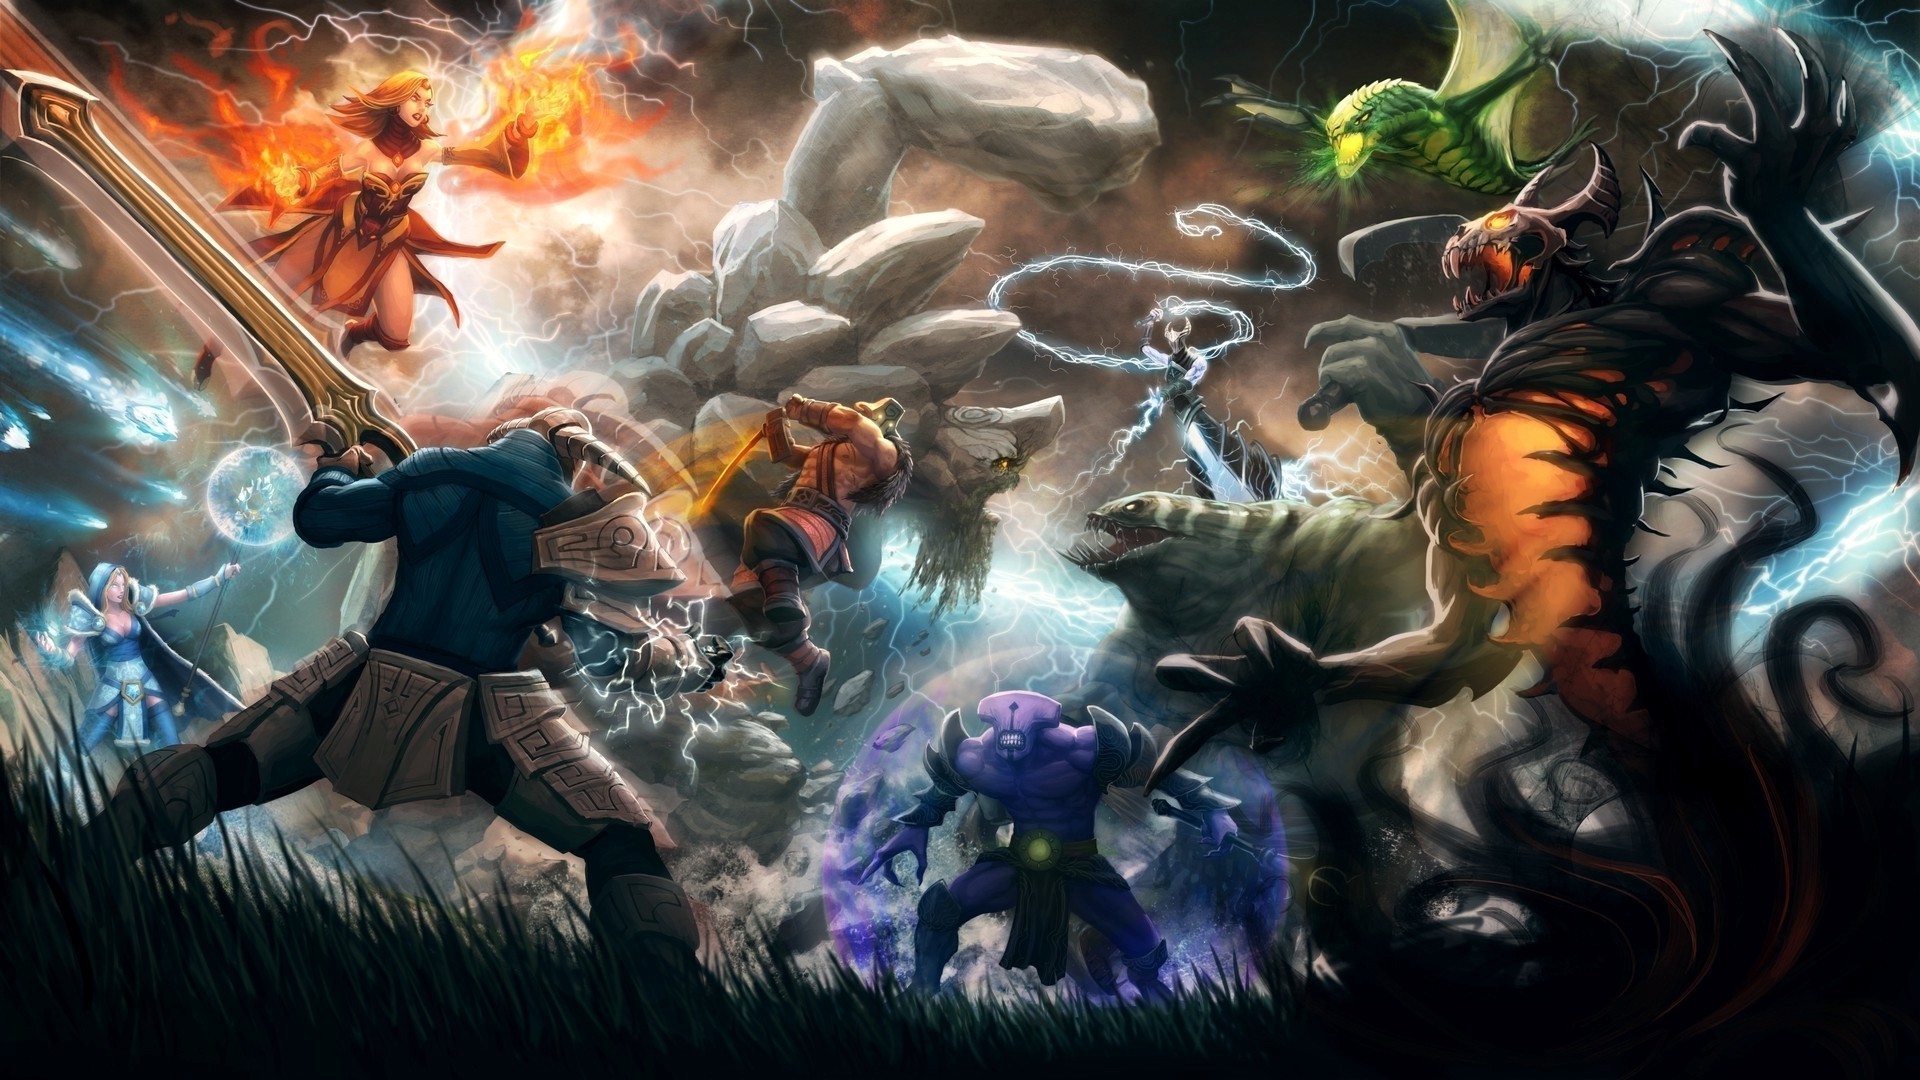 1920x1080 Dota 2 Wallpapers  Hd Awesome Wallpapers Collection Dota 2  Wallpapers